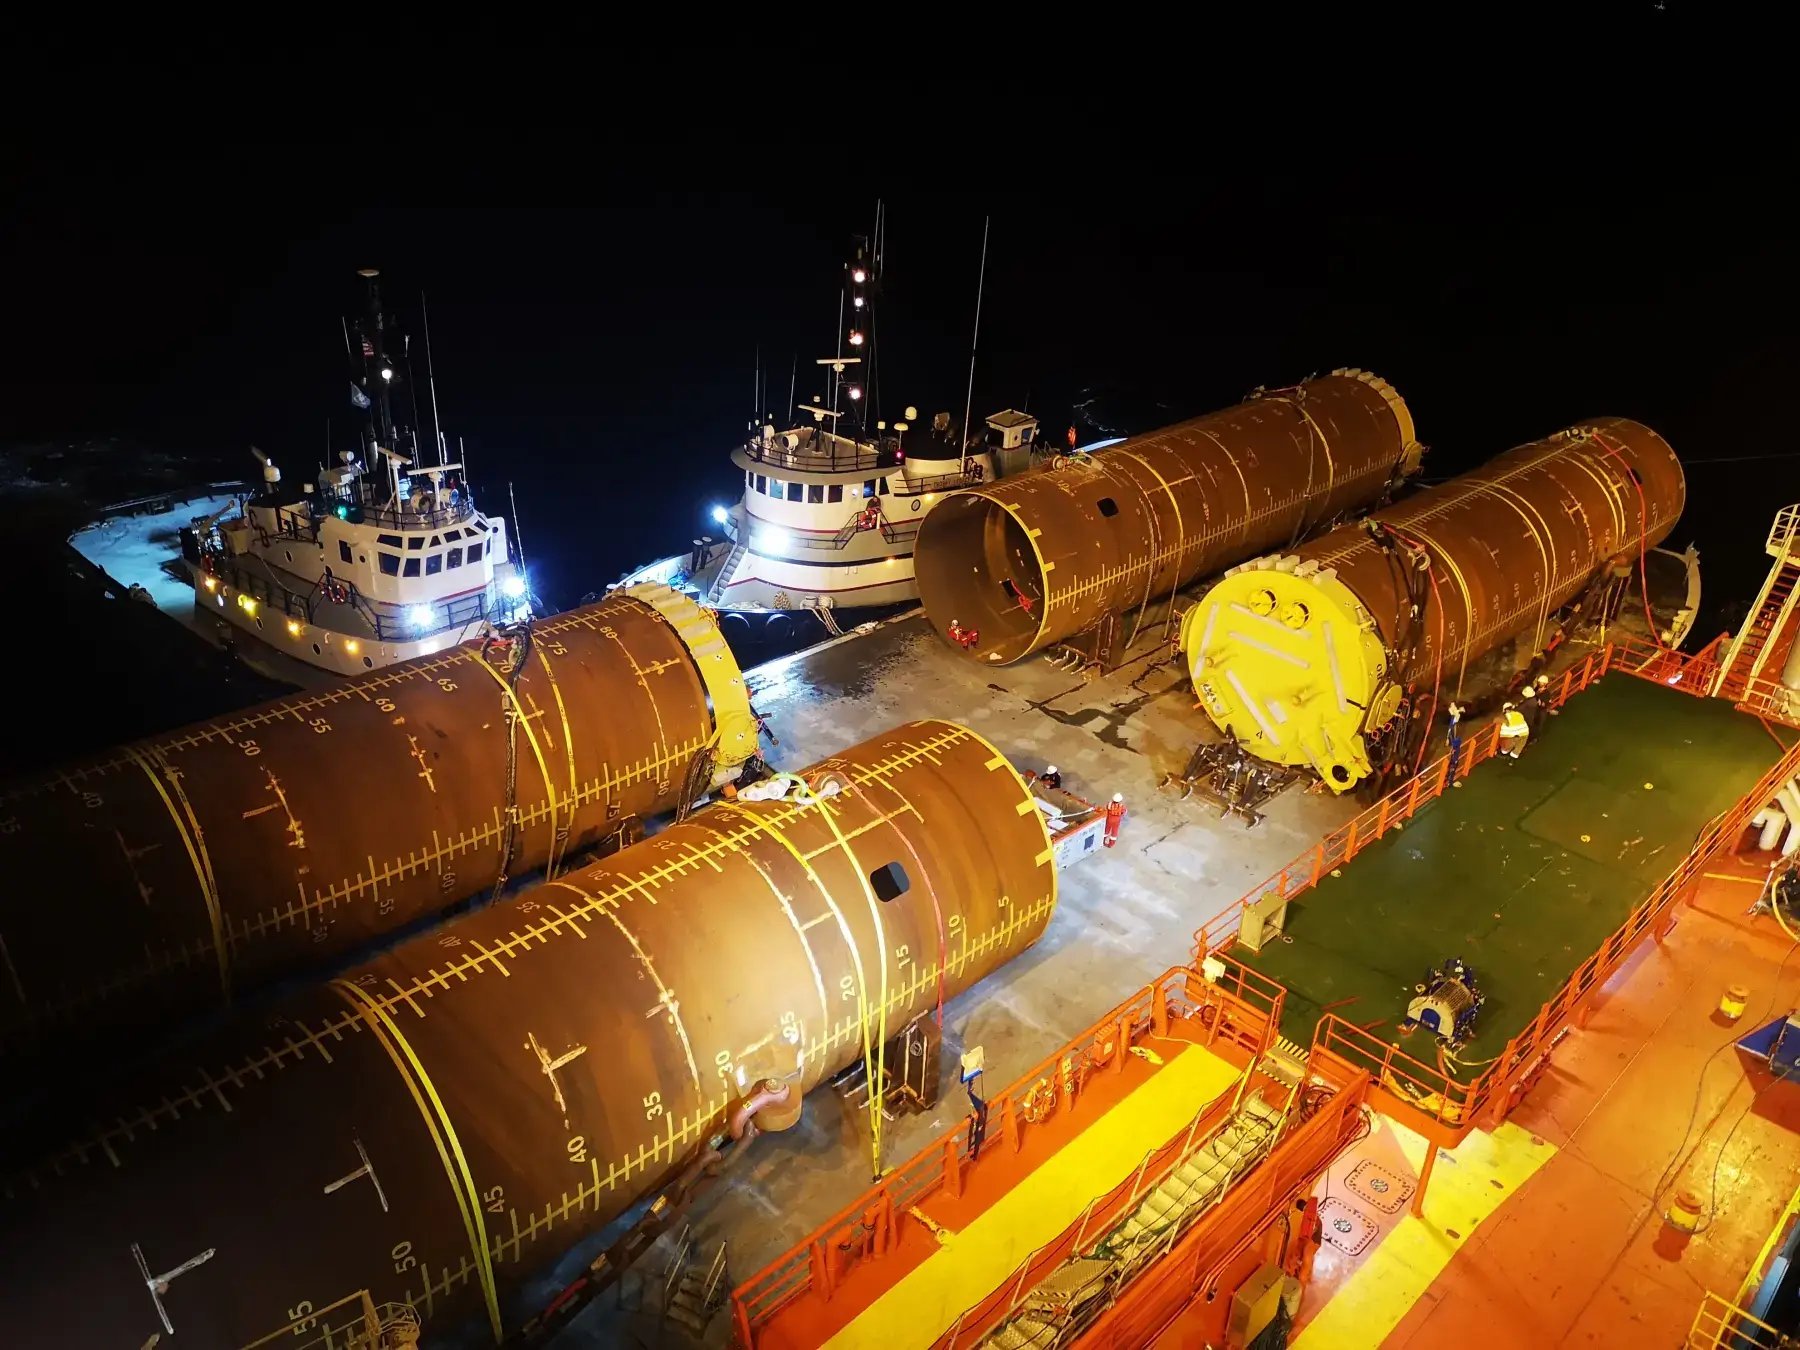 Suction Piles on deck, Catenary Mooring​, 26 954 KN, MoorLOK Connector, 26 954 kN MBL​, 35 year design life​